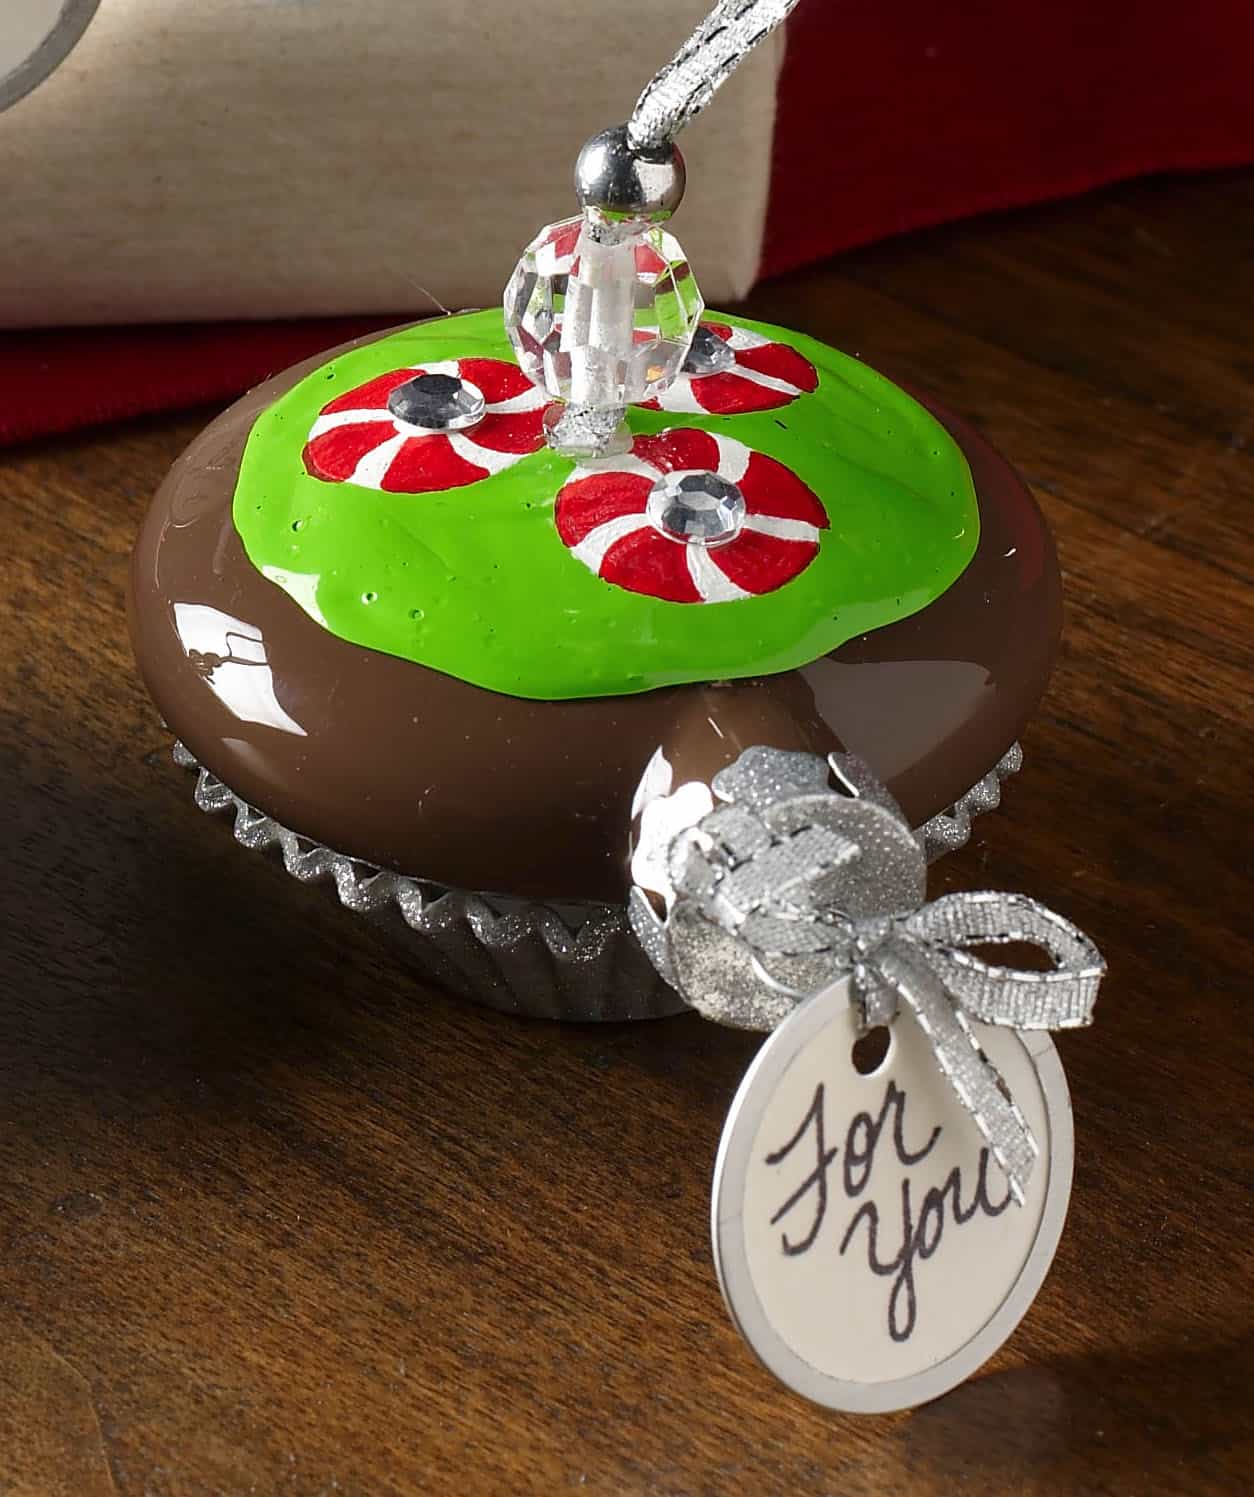 These handmade Christmas ornaments are regular ornaments painted to look just like cupcakes! Have you ever seen anything so sweet?